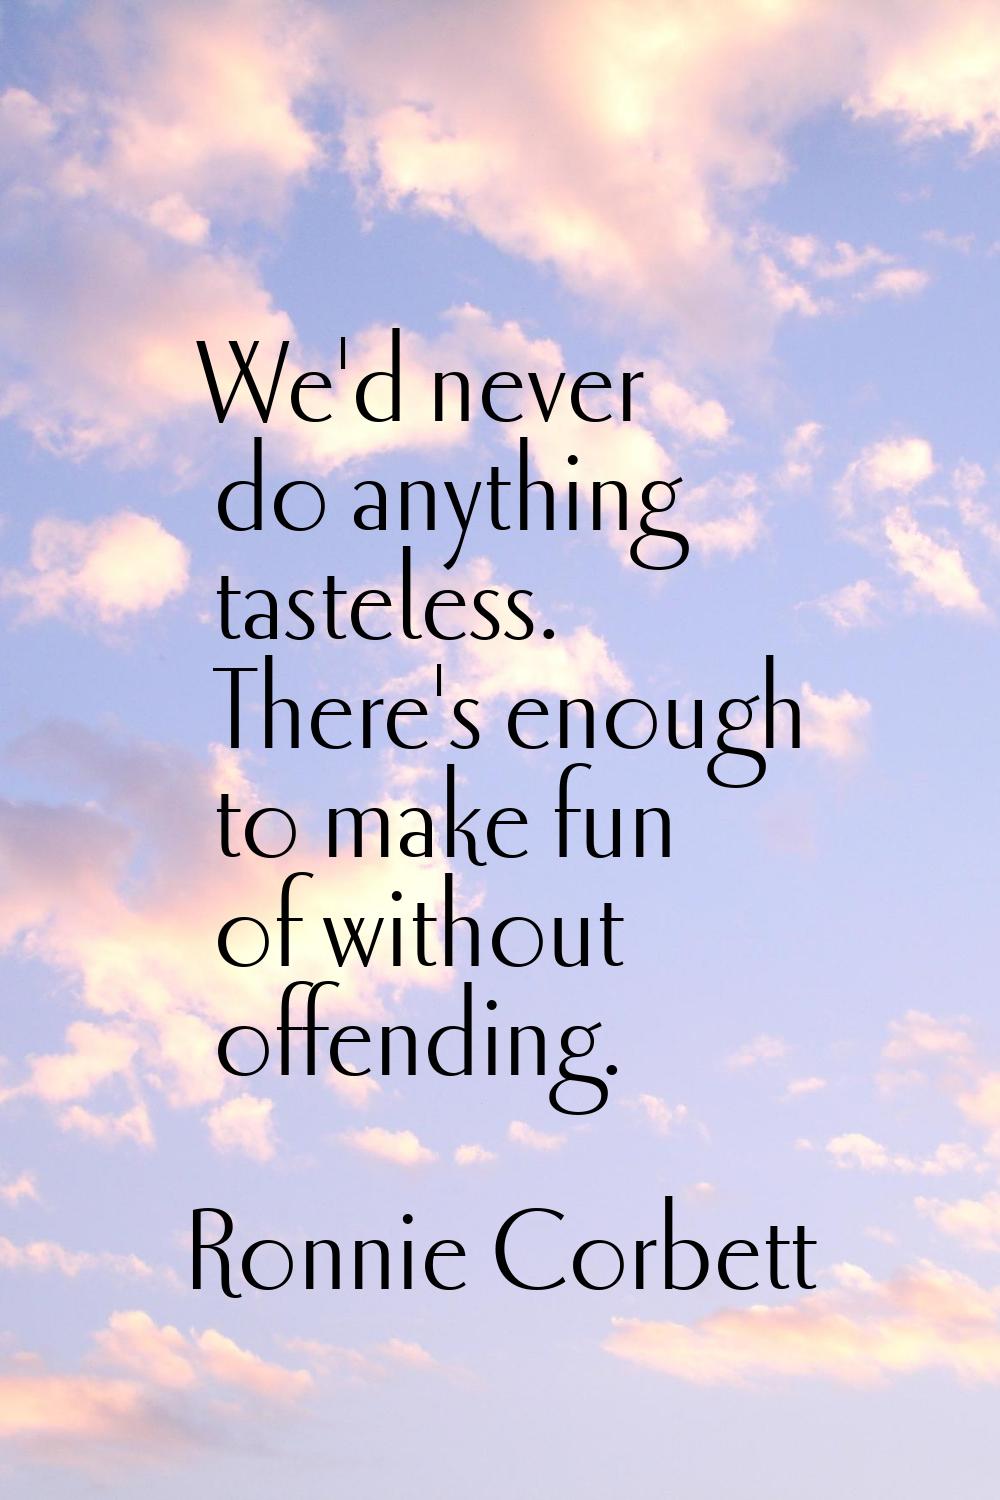 We'd never do anything tasteless. There's enough to make fun of without offending.